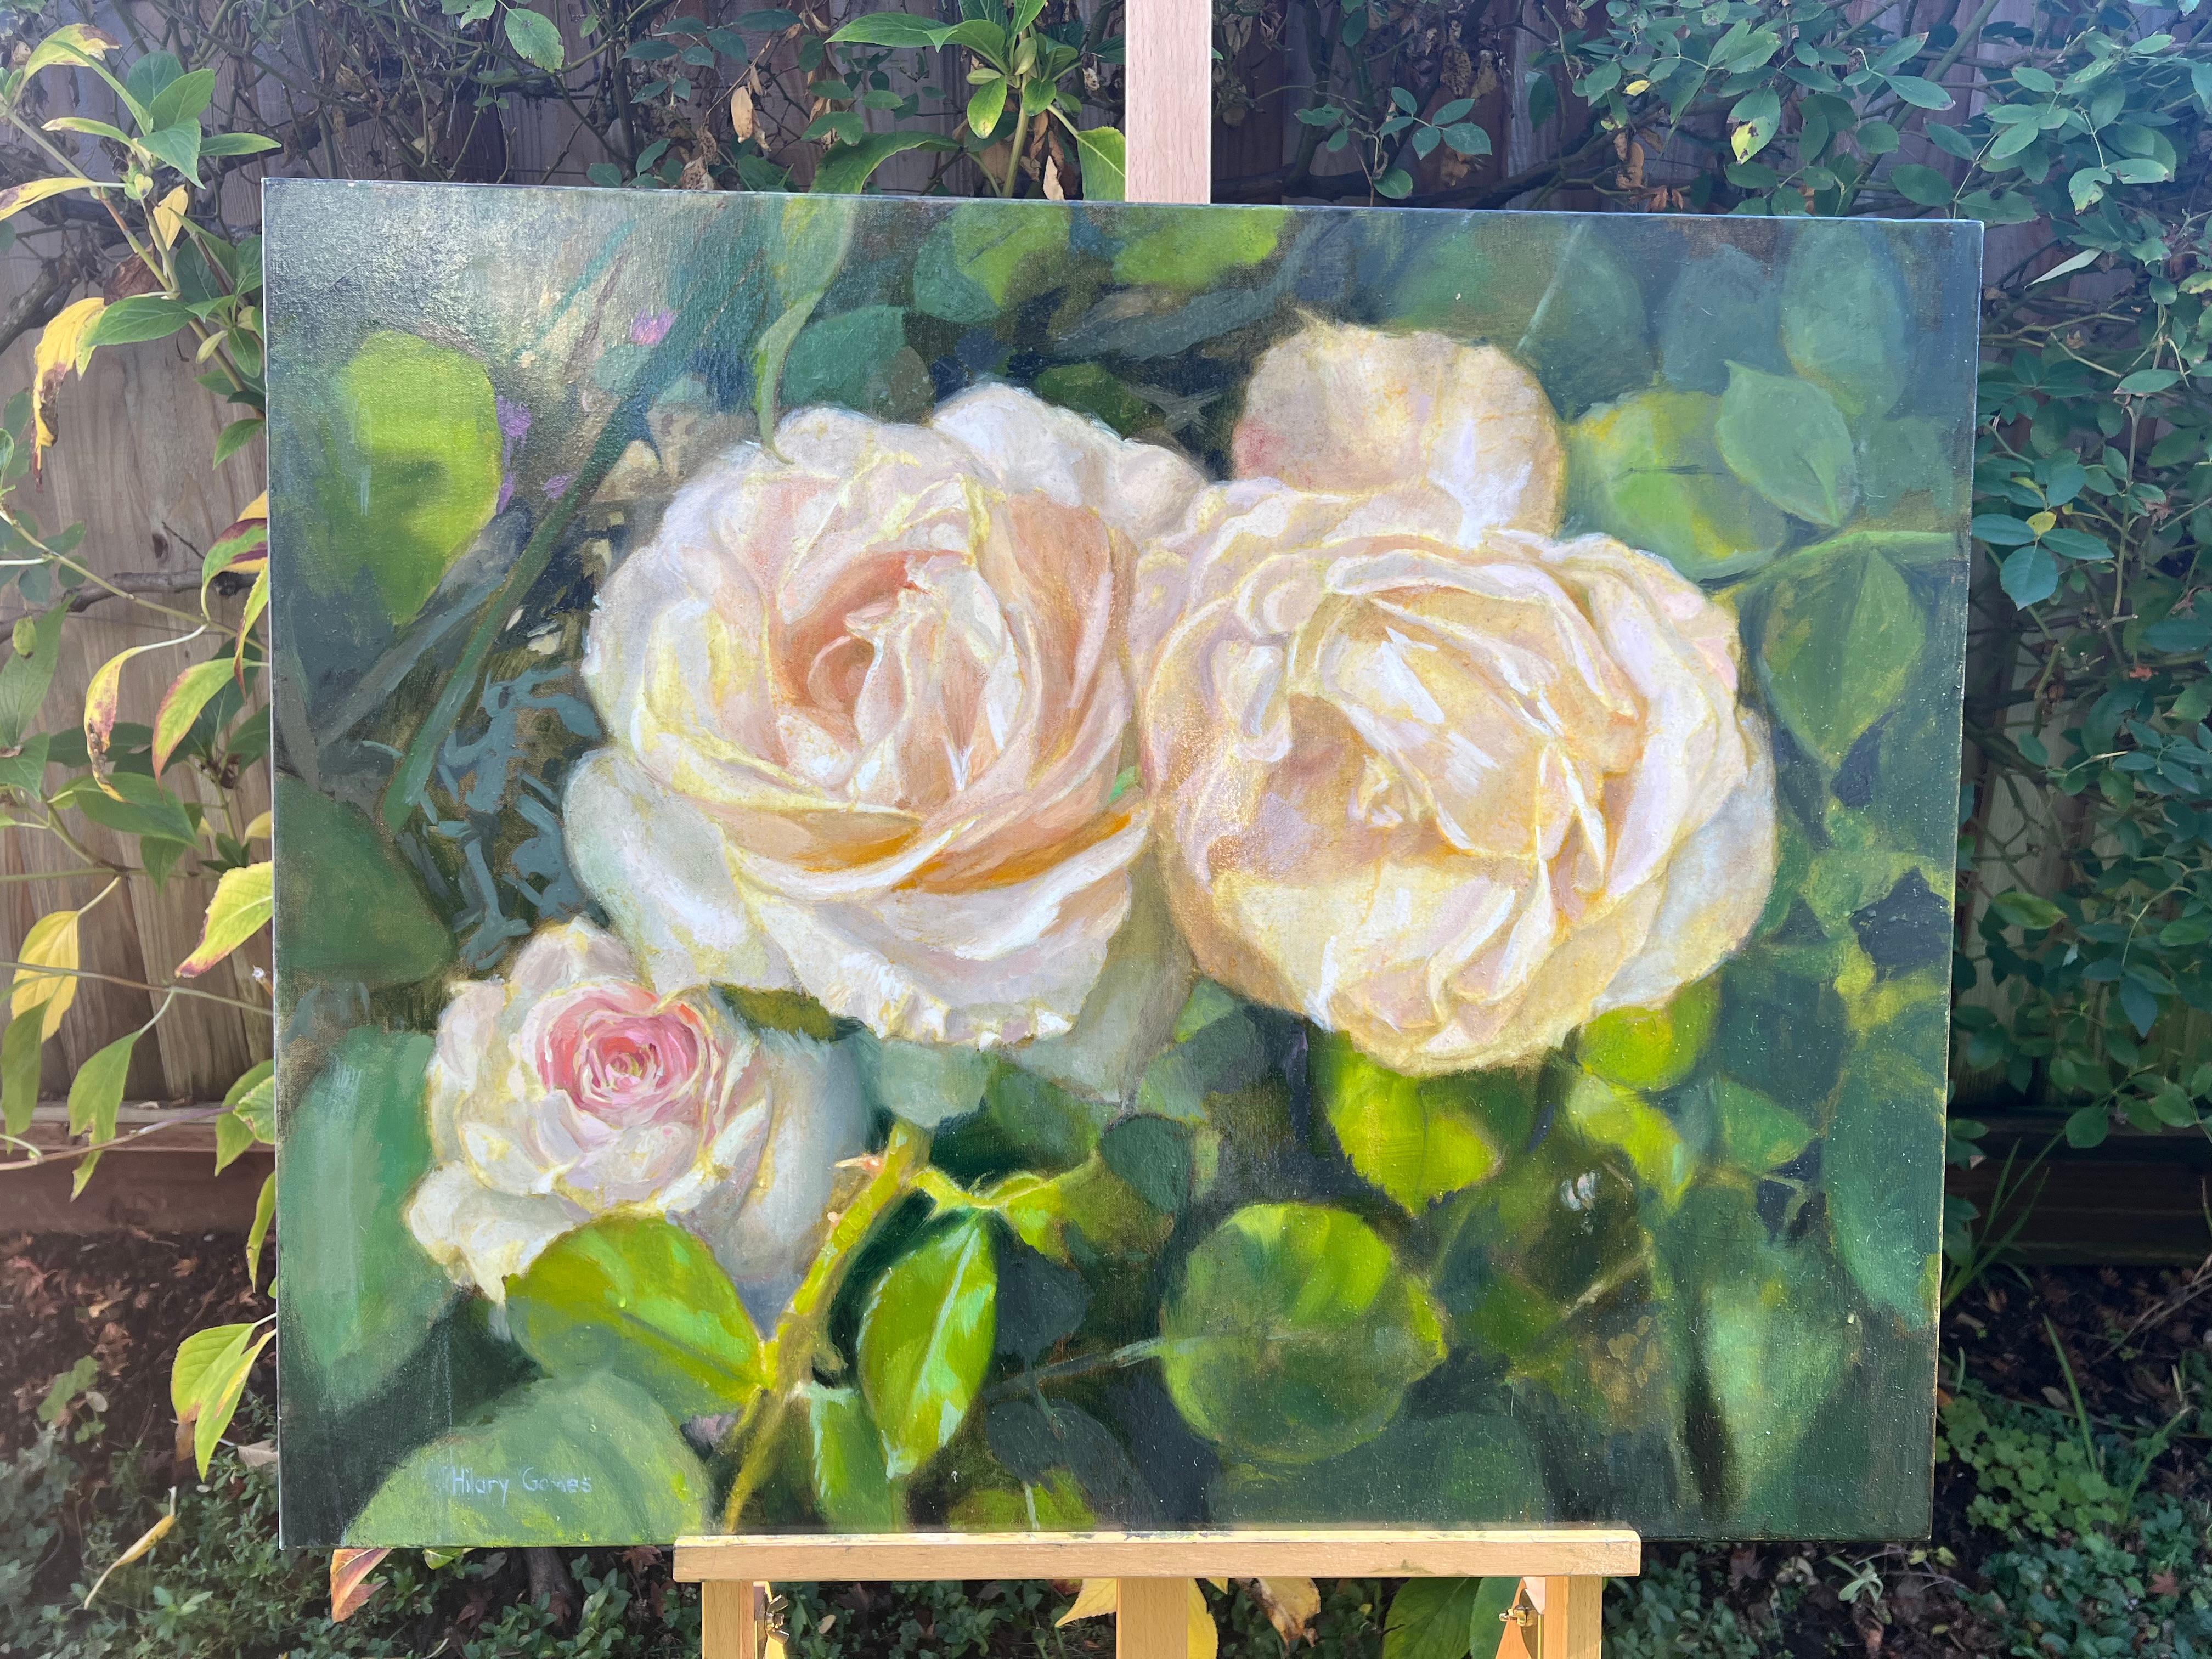 <p>Artist Comments<br>Light peach roses bloom from a bed of thriving leaves, with the soft edges of their petals displaying their delicate nature. The sun casts a gentle glow on the garden, imparting a classical aura to the scene. The grisaille